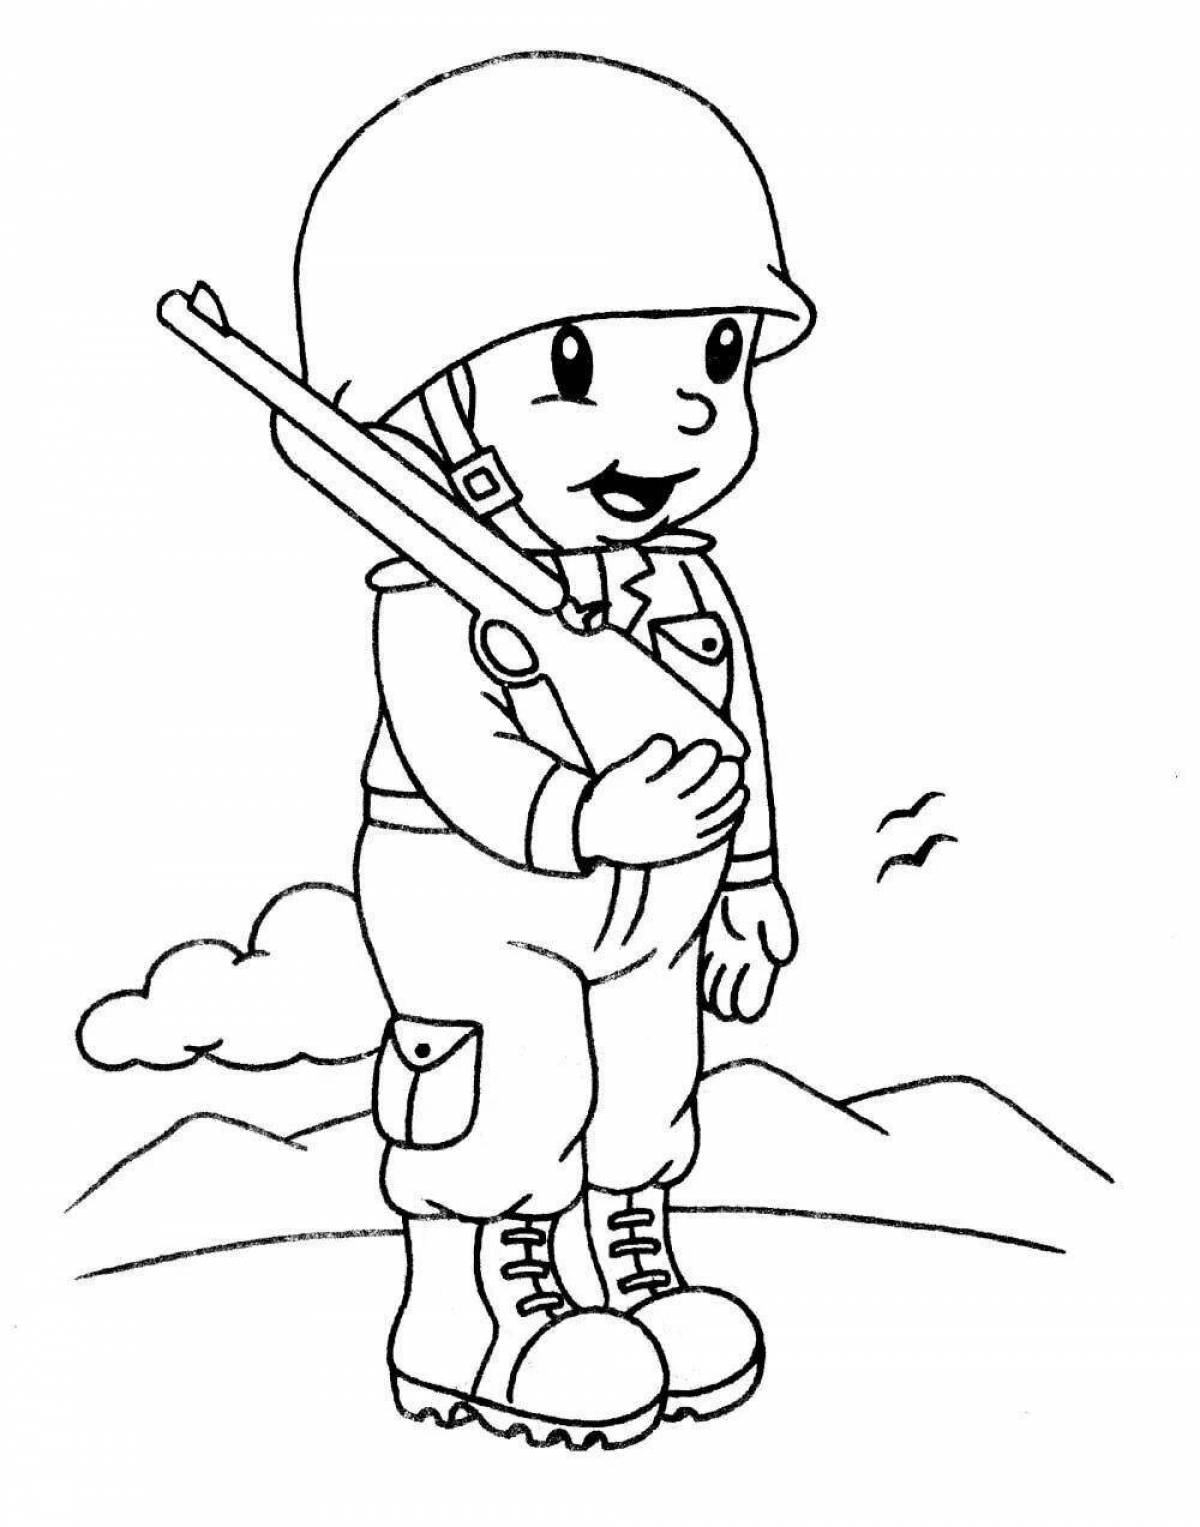 Coloring page vivacious soldier page February 23